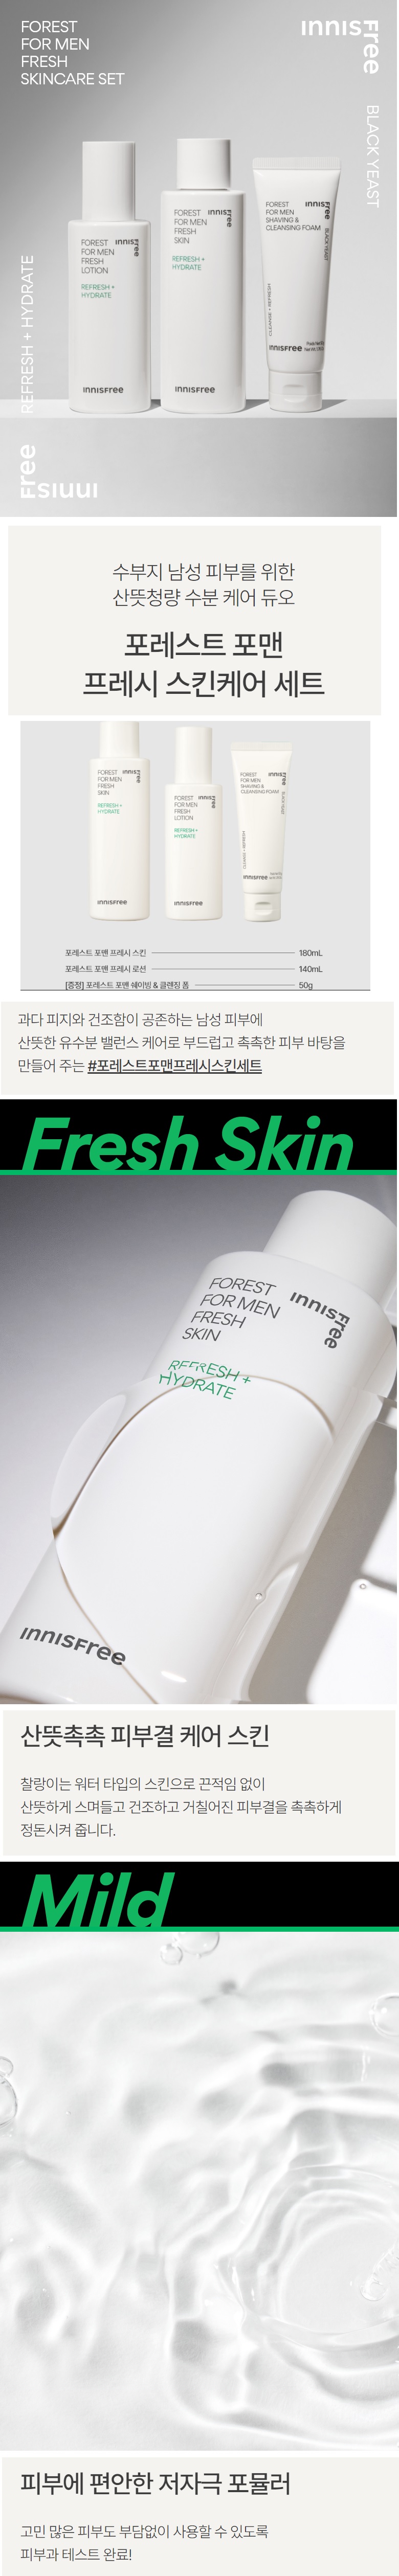 Innisfree Forest For Men Fresh Special Skincare Set korean skincare product online shop malaysia china poland1